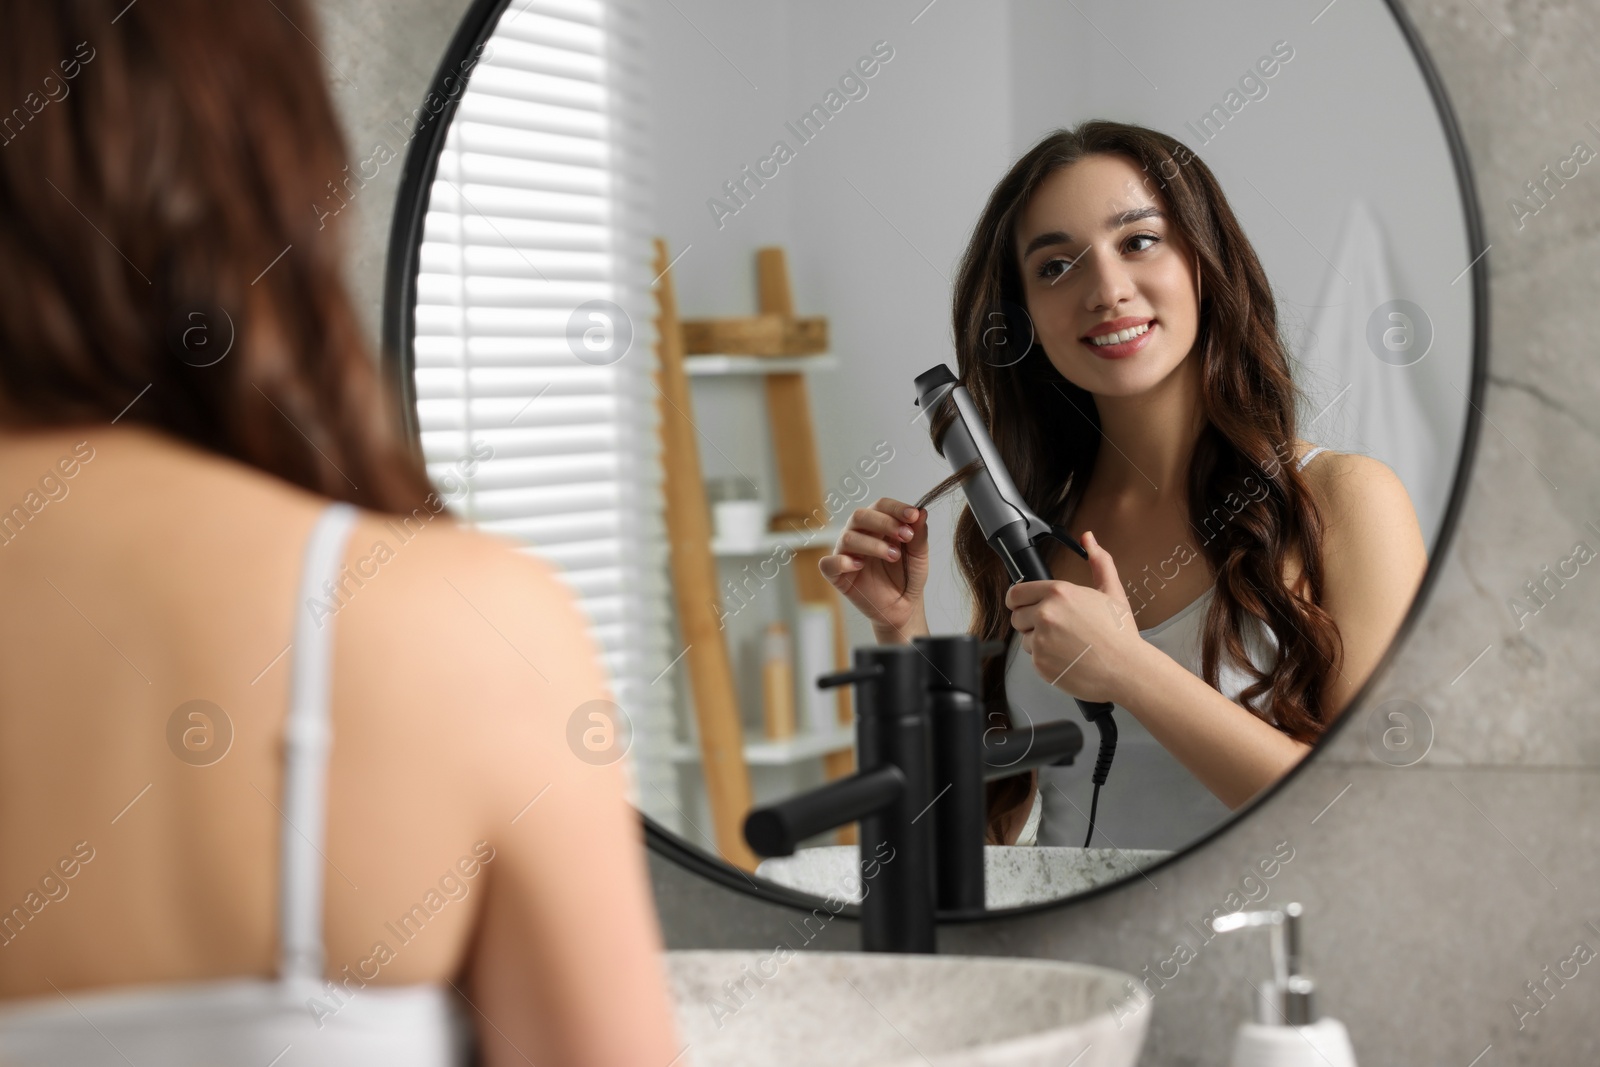 Photo of Smiling woman using curling hair iron near mirror in bathroom